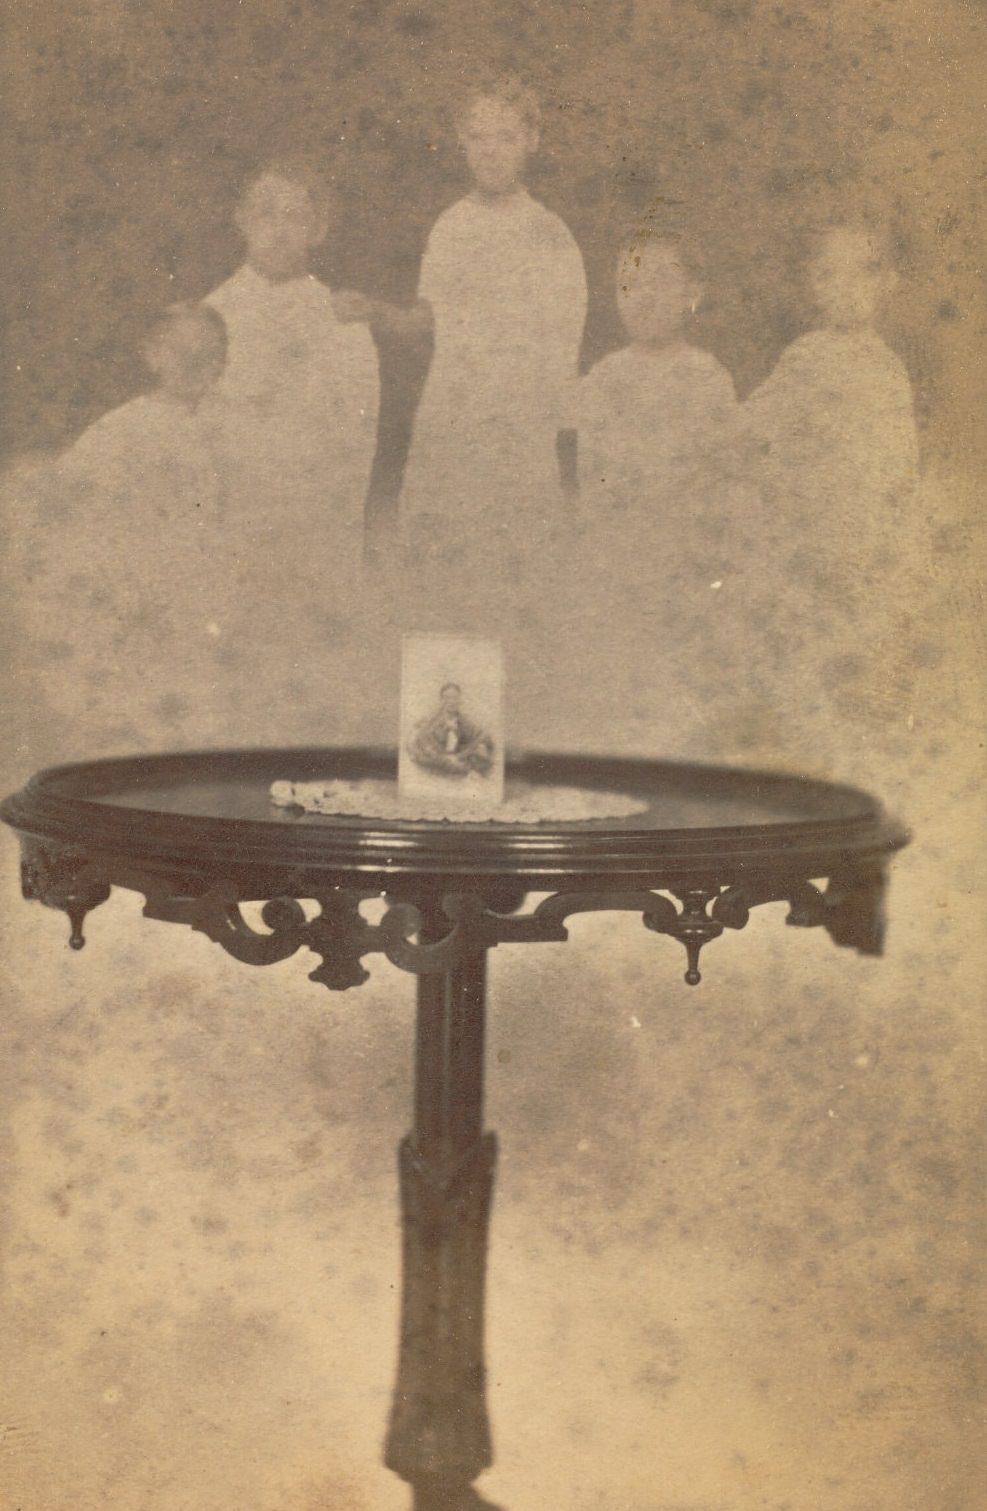 Small round table with a portrait sitting atop it, with the faint image of a group of five people, a man and four children, floating above it